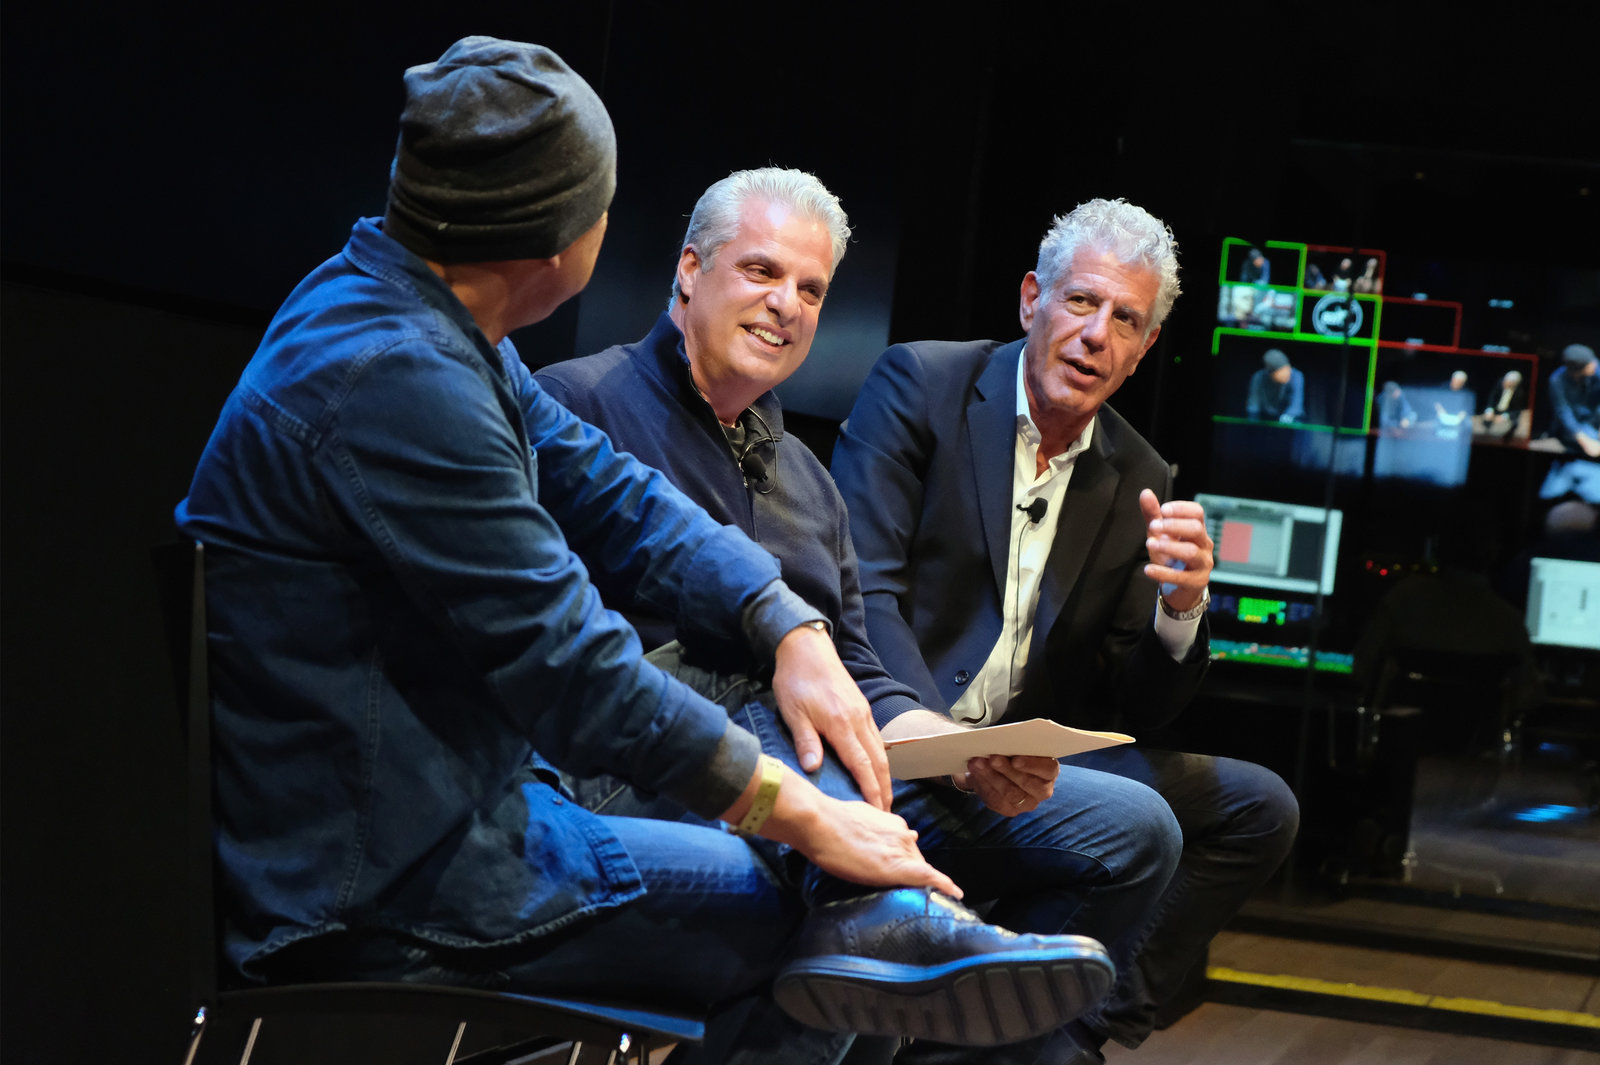 Chefs Masa Takayama (left), Eric Ripert and Anthony Bourdain during a screening of Anthony Bourdain: Parts Unknown in 2016 in New York City.